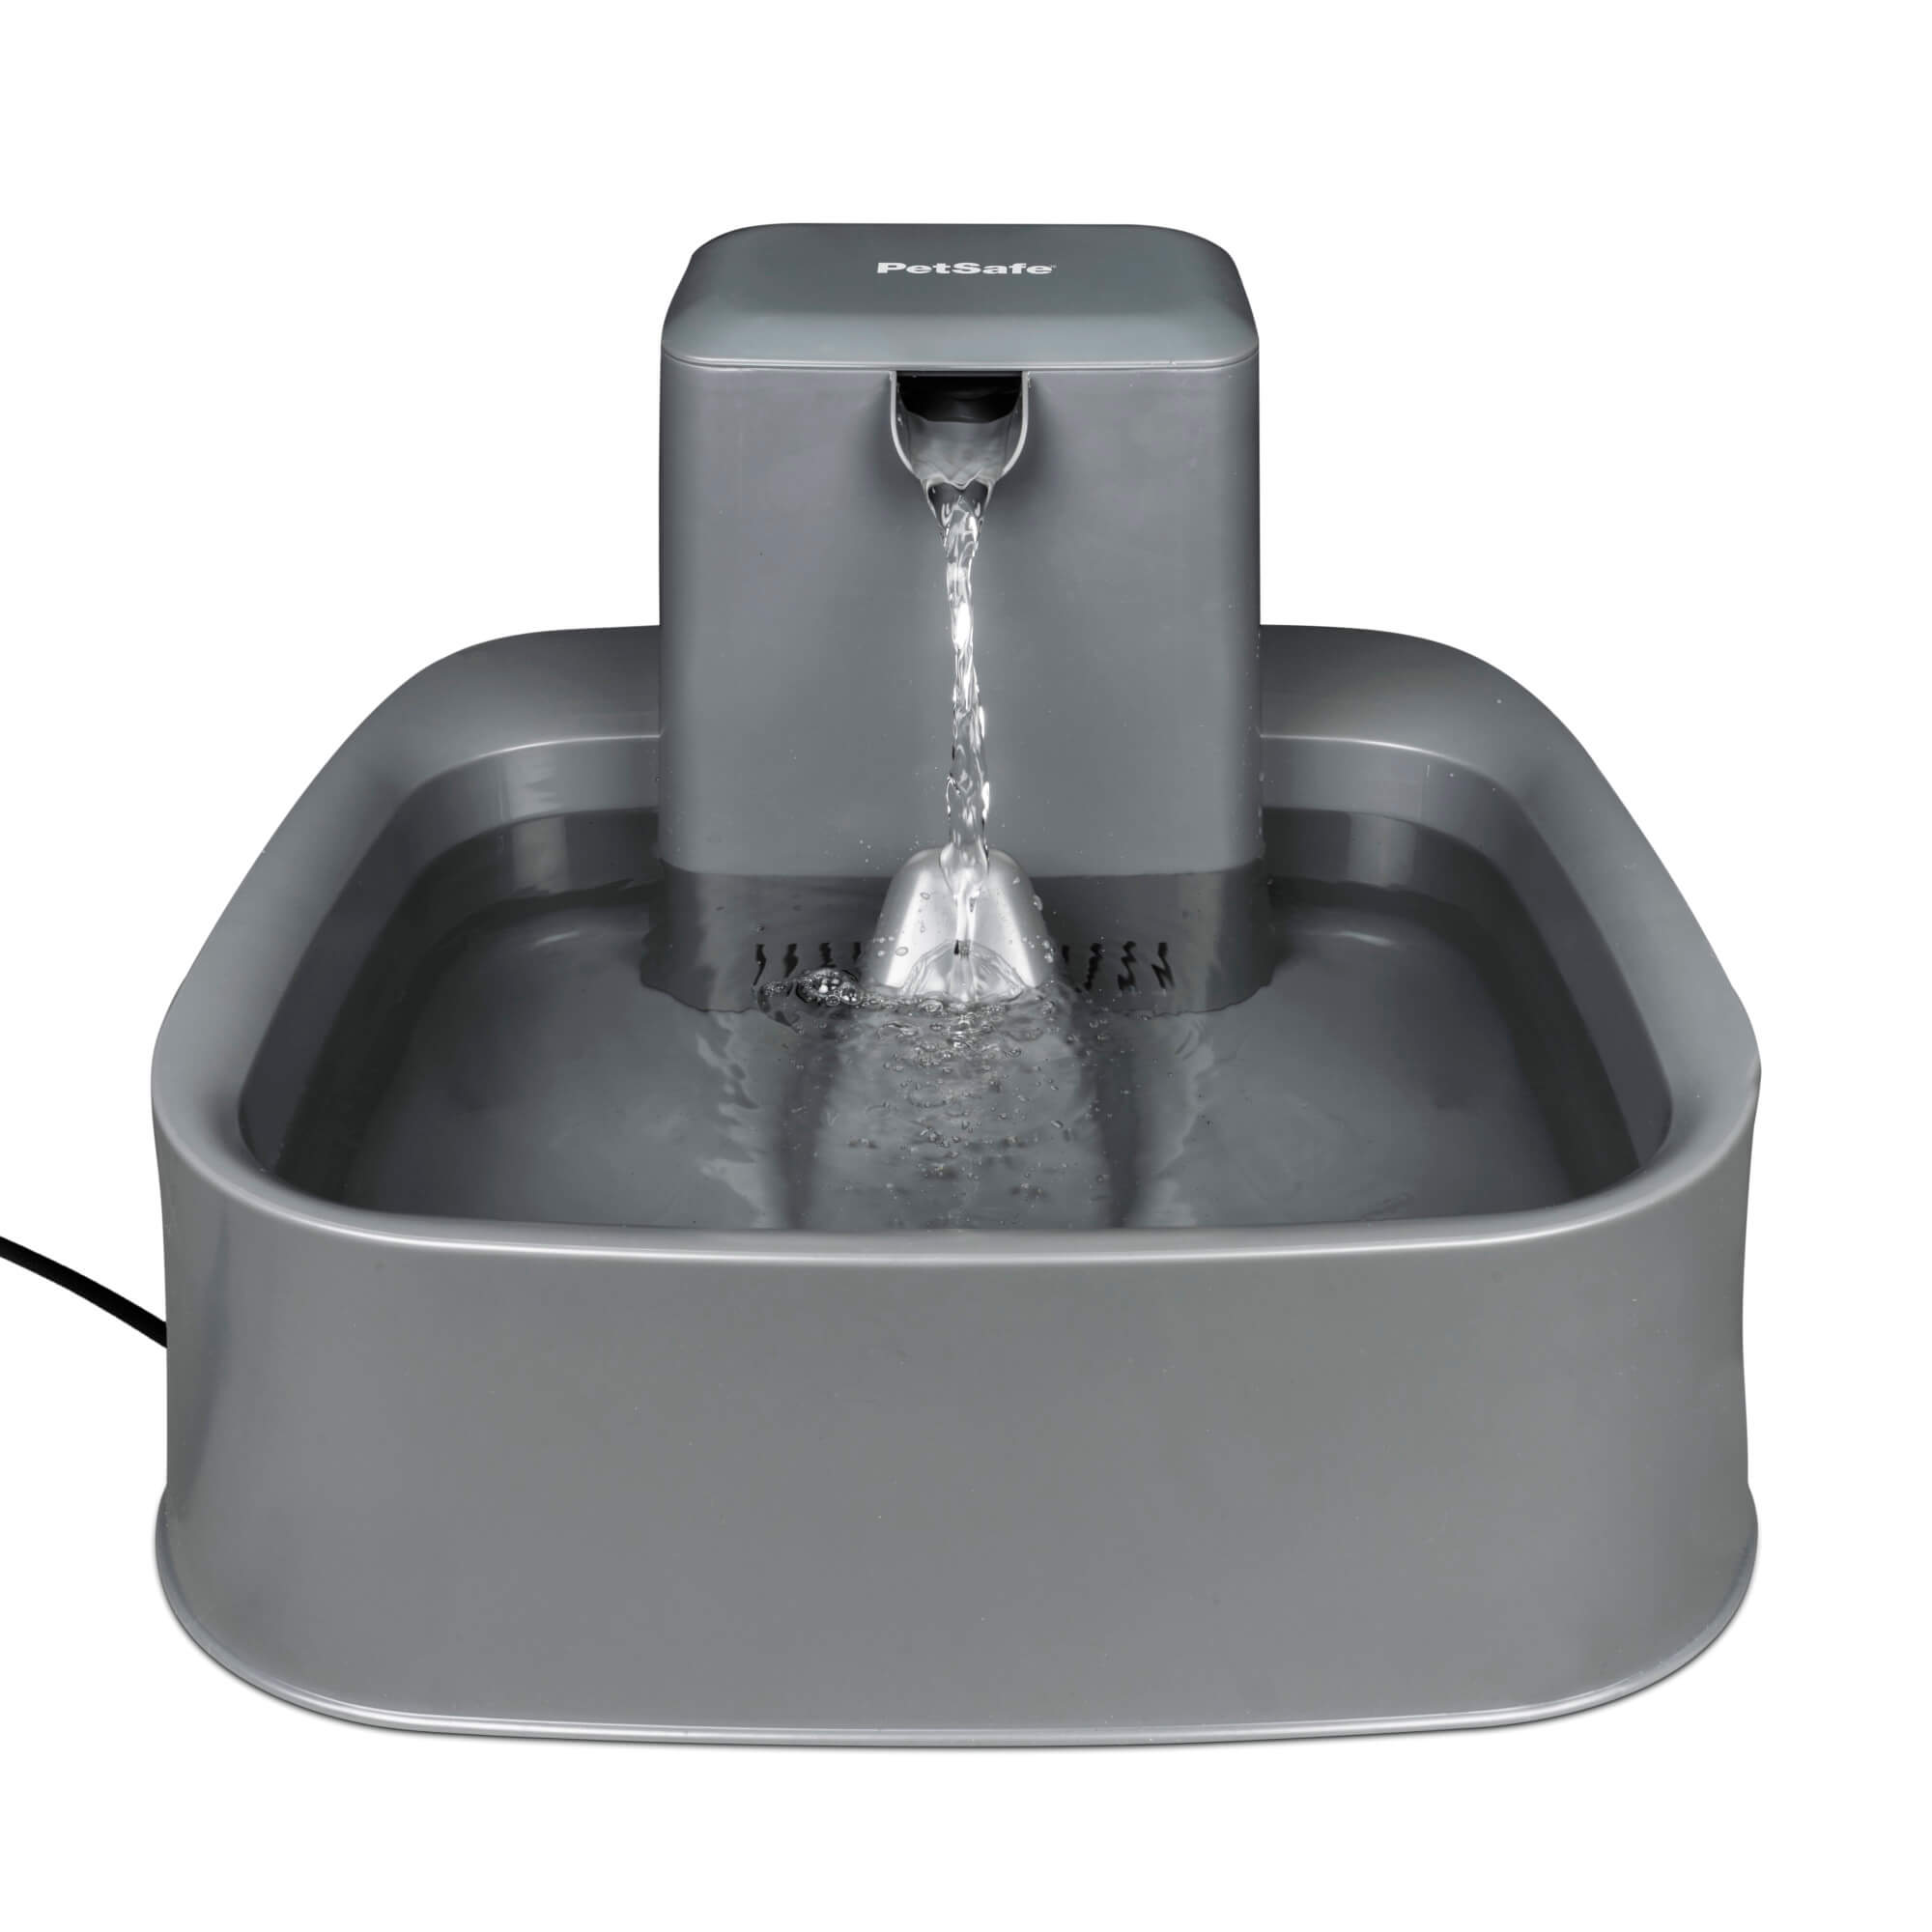 Drinkwell pet fountain - automatic waterer